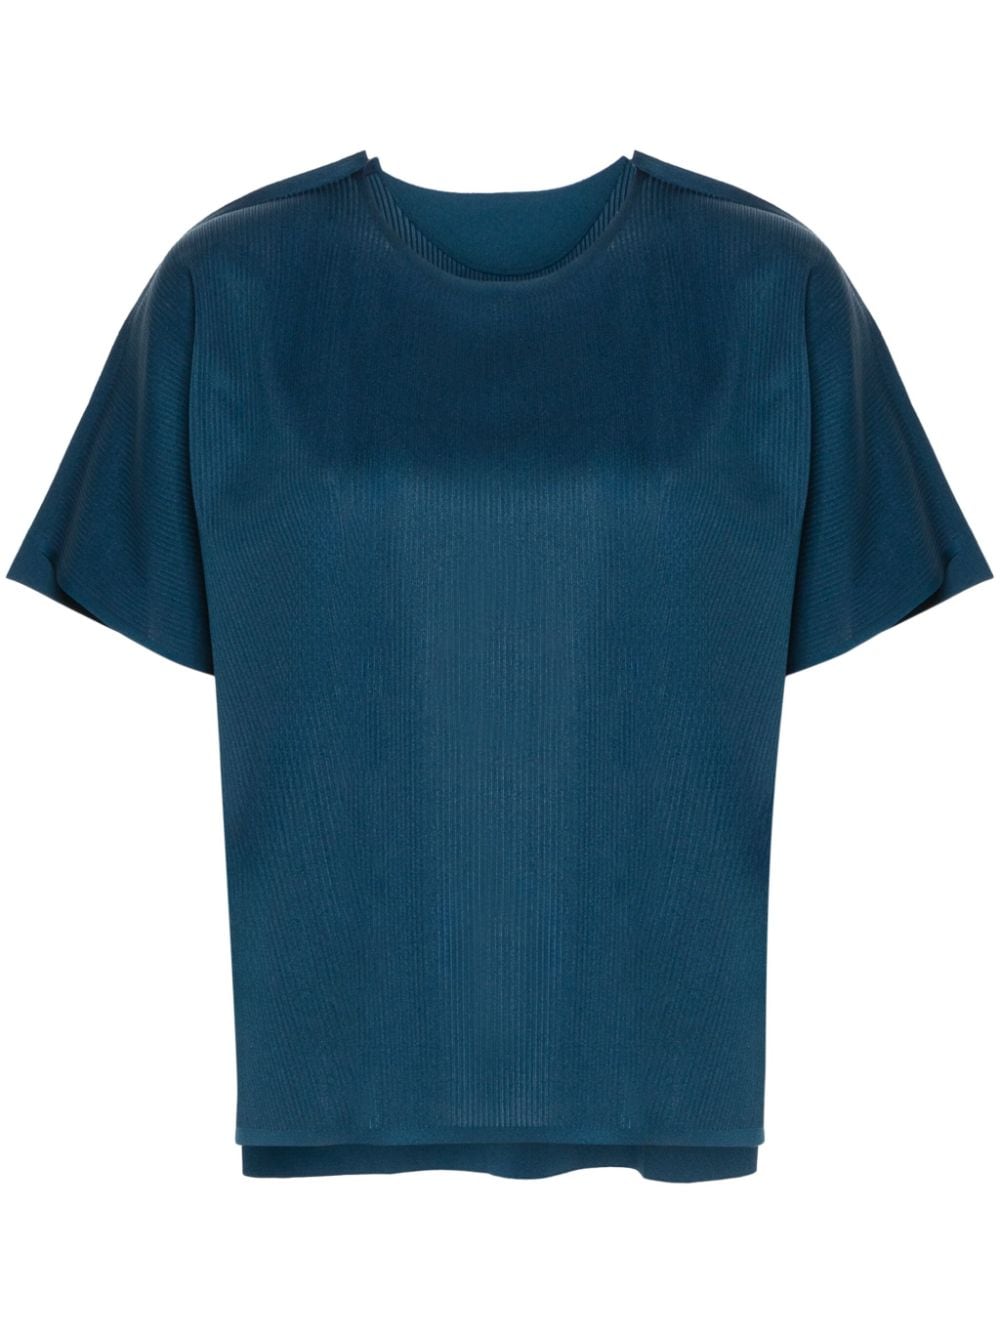 Pleats Please Issey Miyake A-Poc Form ribbed T-shirt - Blue von Pleats Please Issey Miyake